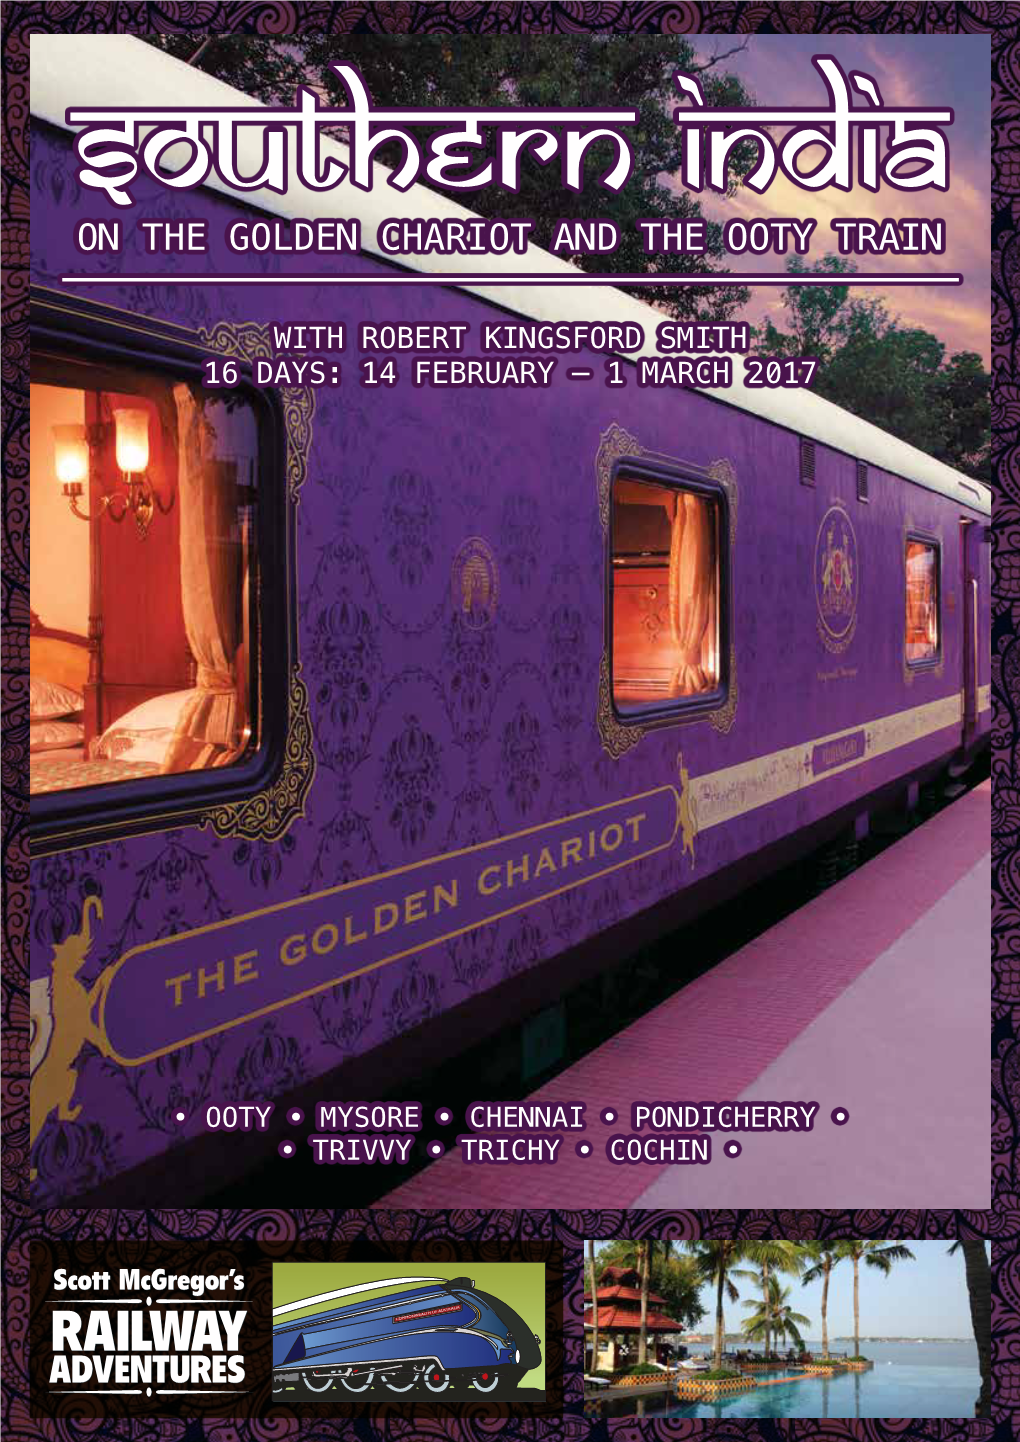 On the Golden Chariot and the Ooty Train